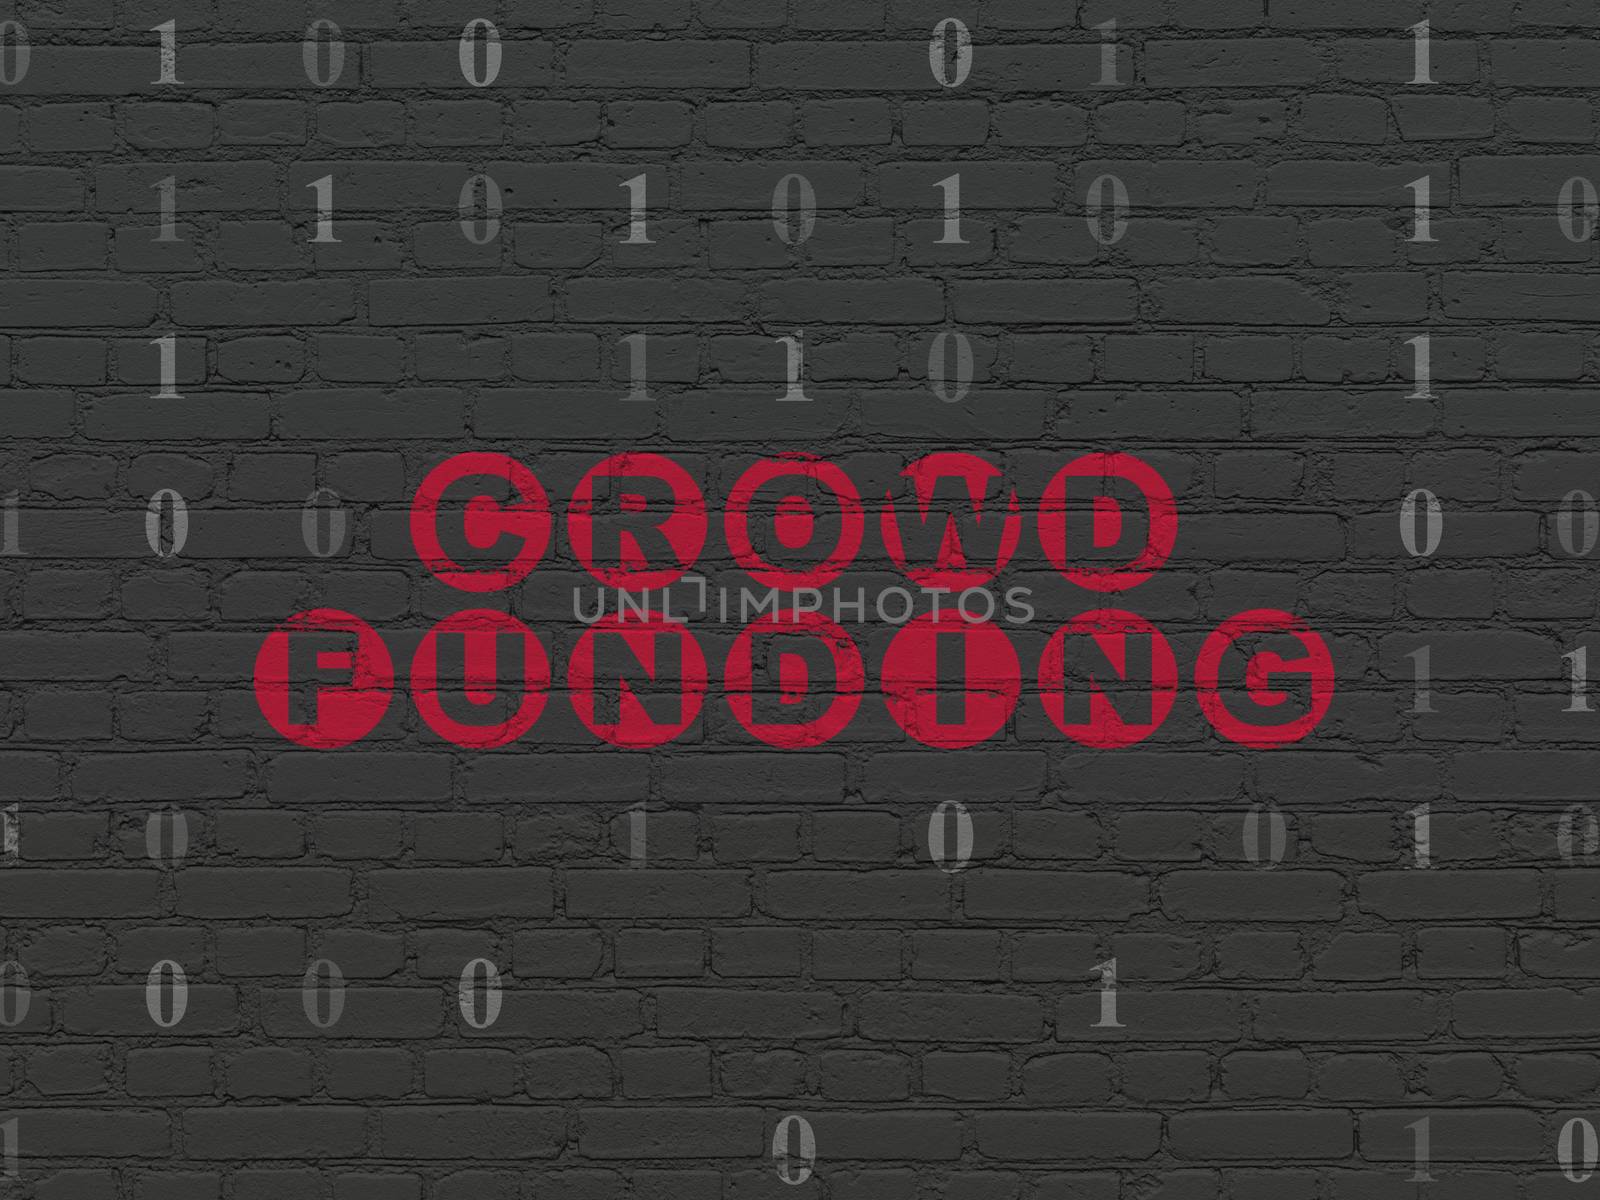 Finance concept: Painted red text Crowd Funding on Black Brick wall background with Binary Code